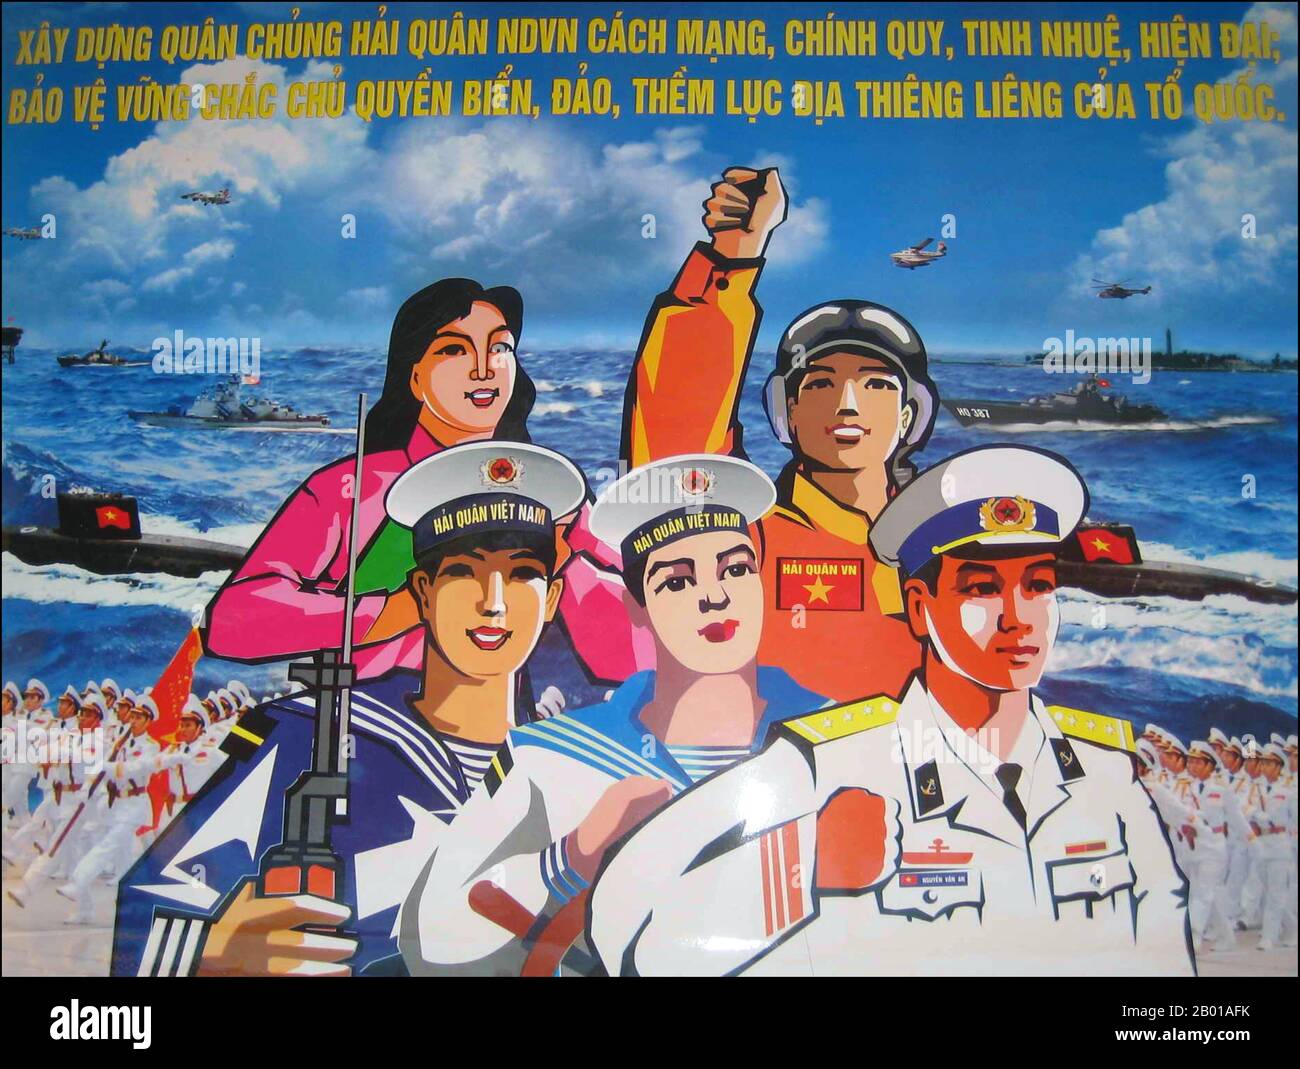 Vietnam: Poster extolling the virtues of the Vietnamese navy.  The Spratlys Archipelago in the South China Sea (called by Vietnam the East Sea) is disputed in various degrees by China, Taiwan, Vietnam, Philippines, Malaysia and Brunei. The Paracels Islands are disputed between China and Vietnam, but have been controlled completely by China since 1974.  The Chinese claim is the most extensive and is generally indicated by a notional frontier termed by the Chinese the 'Nine Dotted Line' (nánhǎi jiǔduàn xiàn; literally 'Nine division lines of the South China Sea'). Stock Photo